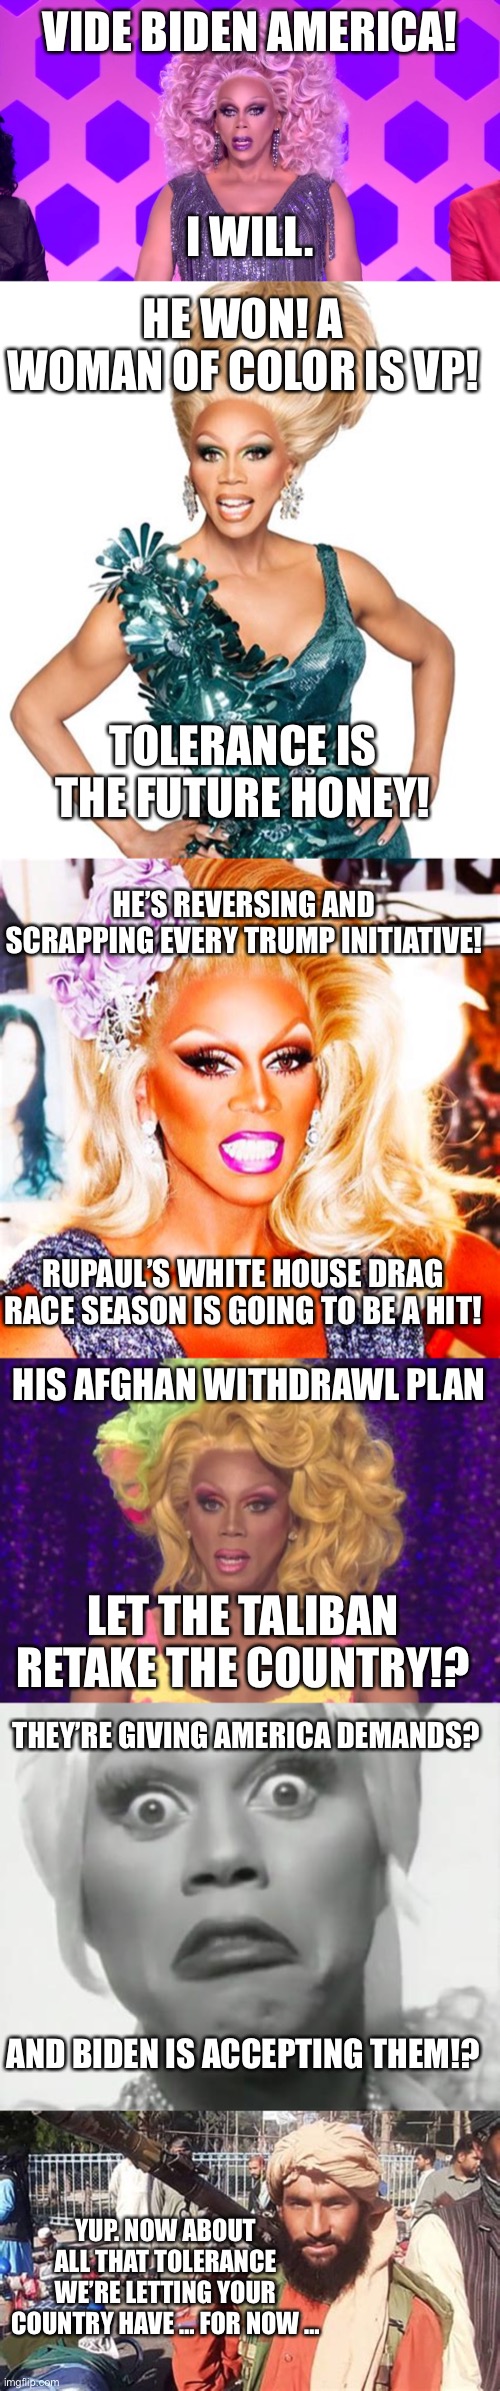 The Rupaul candidate | VIDE BIDEN AMERICA! I WILL. HE WON! A WOMAN OF COLOR IS VP! TOLERANCE IS THE FUTURE HONEY! HE’S REVERSING AND SCRAPPING EVERY TRUMP INITIATIVE! RUPAUL’S WHITE HOUSE DRAG RACE SEASON IS GOING TO BE A HIT! HIS AFGHAN WITHDRAWL PLAN; LET THE TALIBAN RETAKE THE COUNTRY!? THEY’RE GIVING AMERICA DEMANDS? AND BIDEN IS ACCEPTING THEM!? YUP. NOW ABOUT ALL THAT TOLERANCE WE’RE LETTING YOUR COUNTRY HAVE … FOR NOW … | image tagged in rupaul made my decision,rupaul shocked,rupaul | made w/ Imgflip meme maker